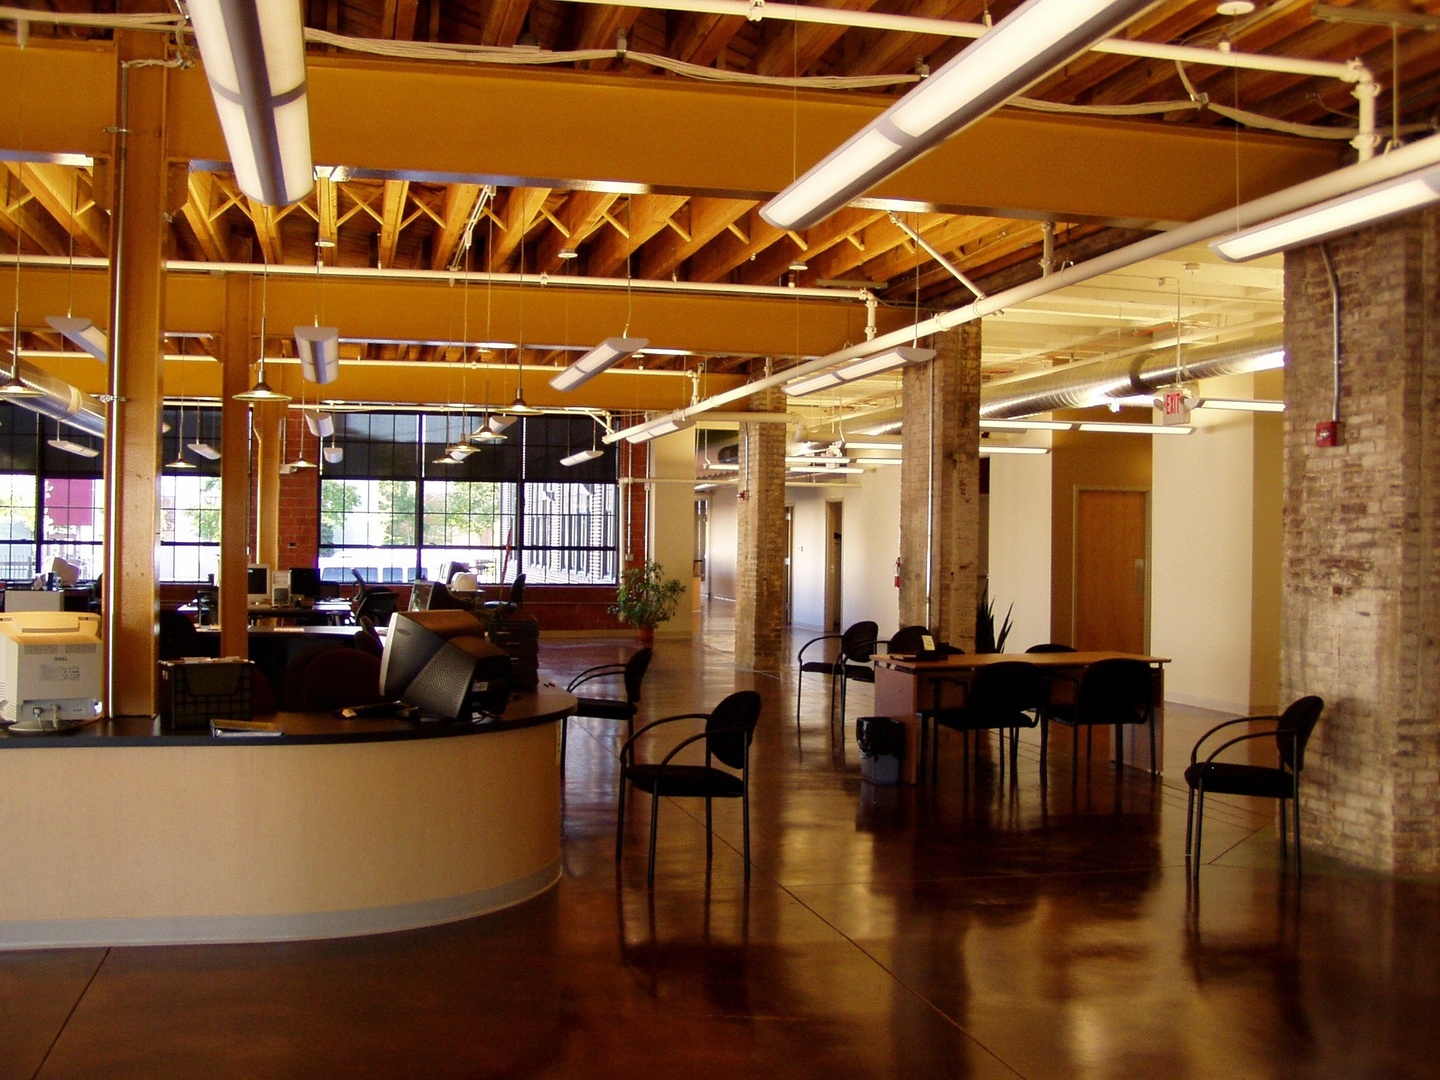 Interior view of renovated office space showing exposed timber structure and masonry columns with suspended lights